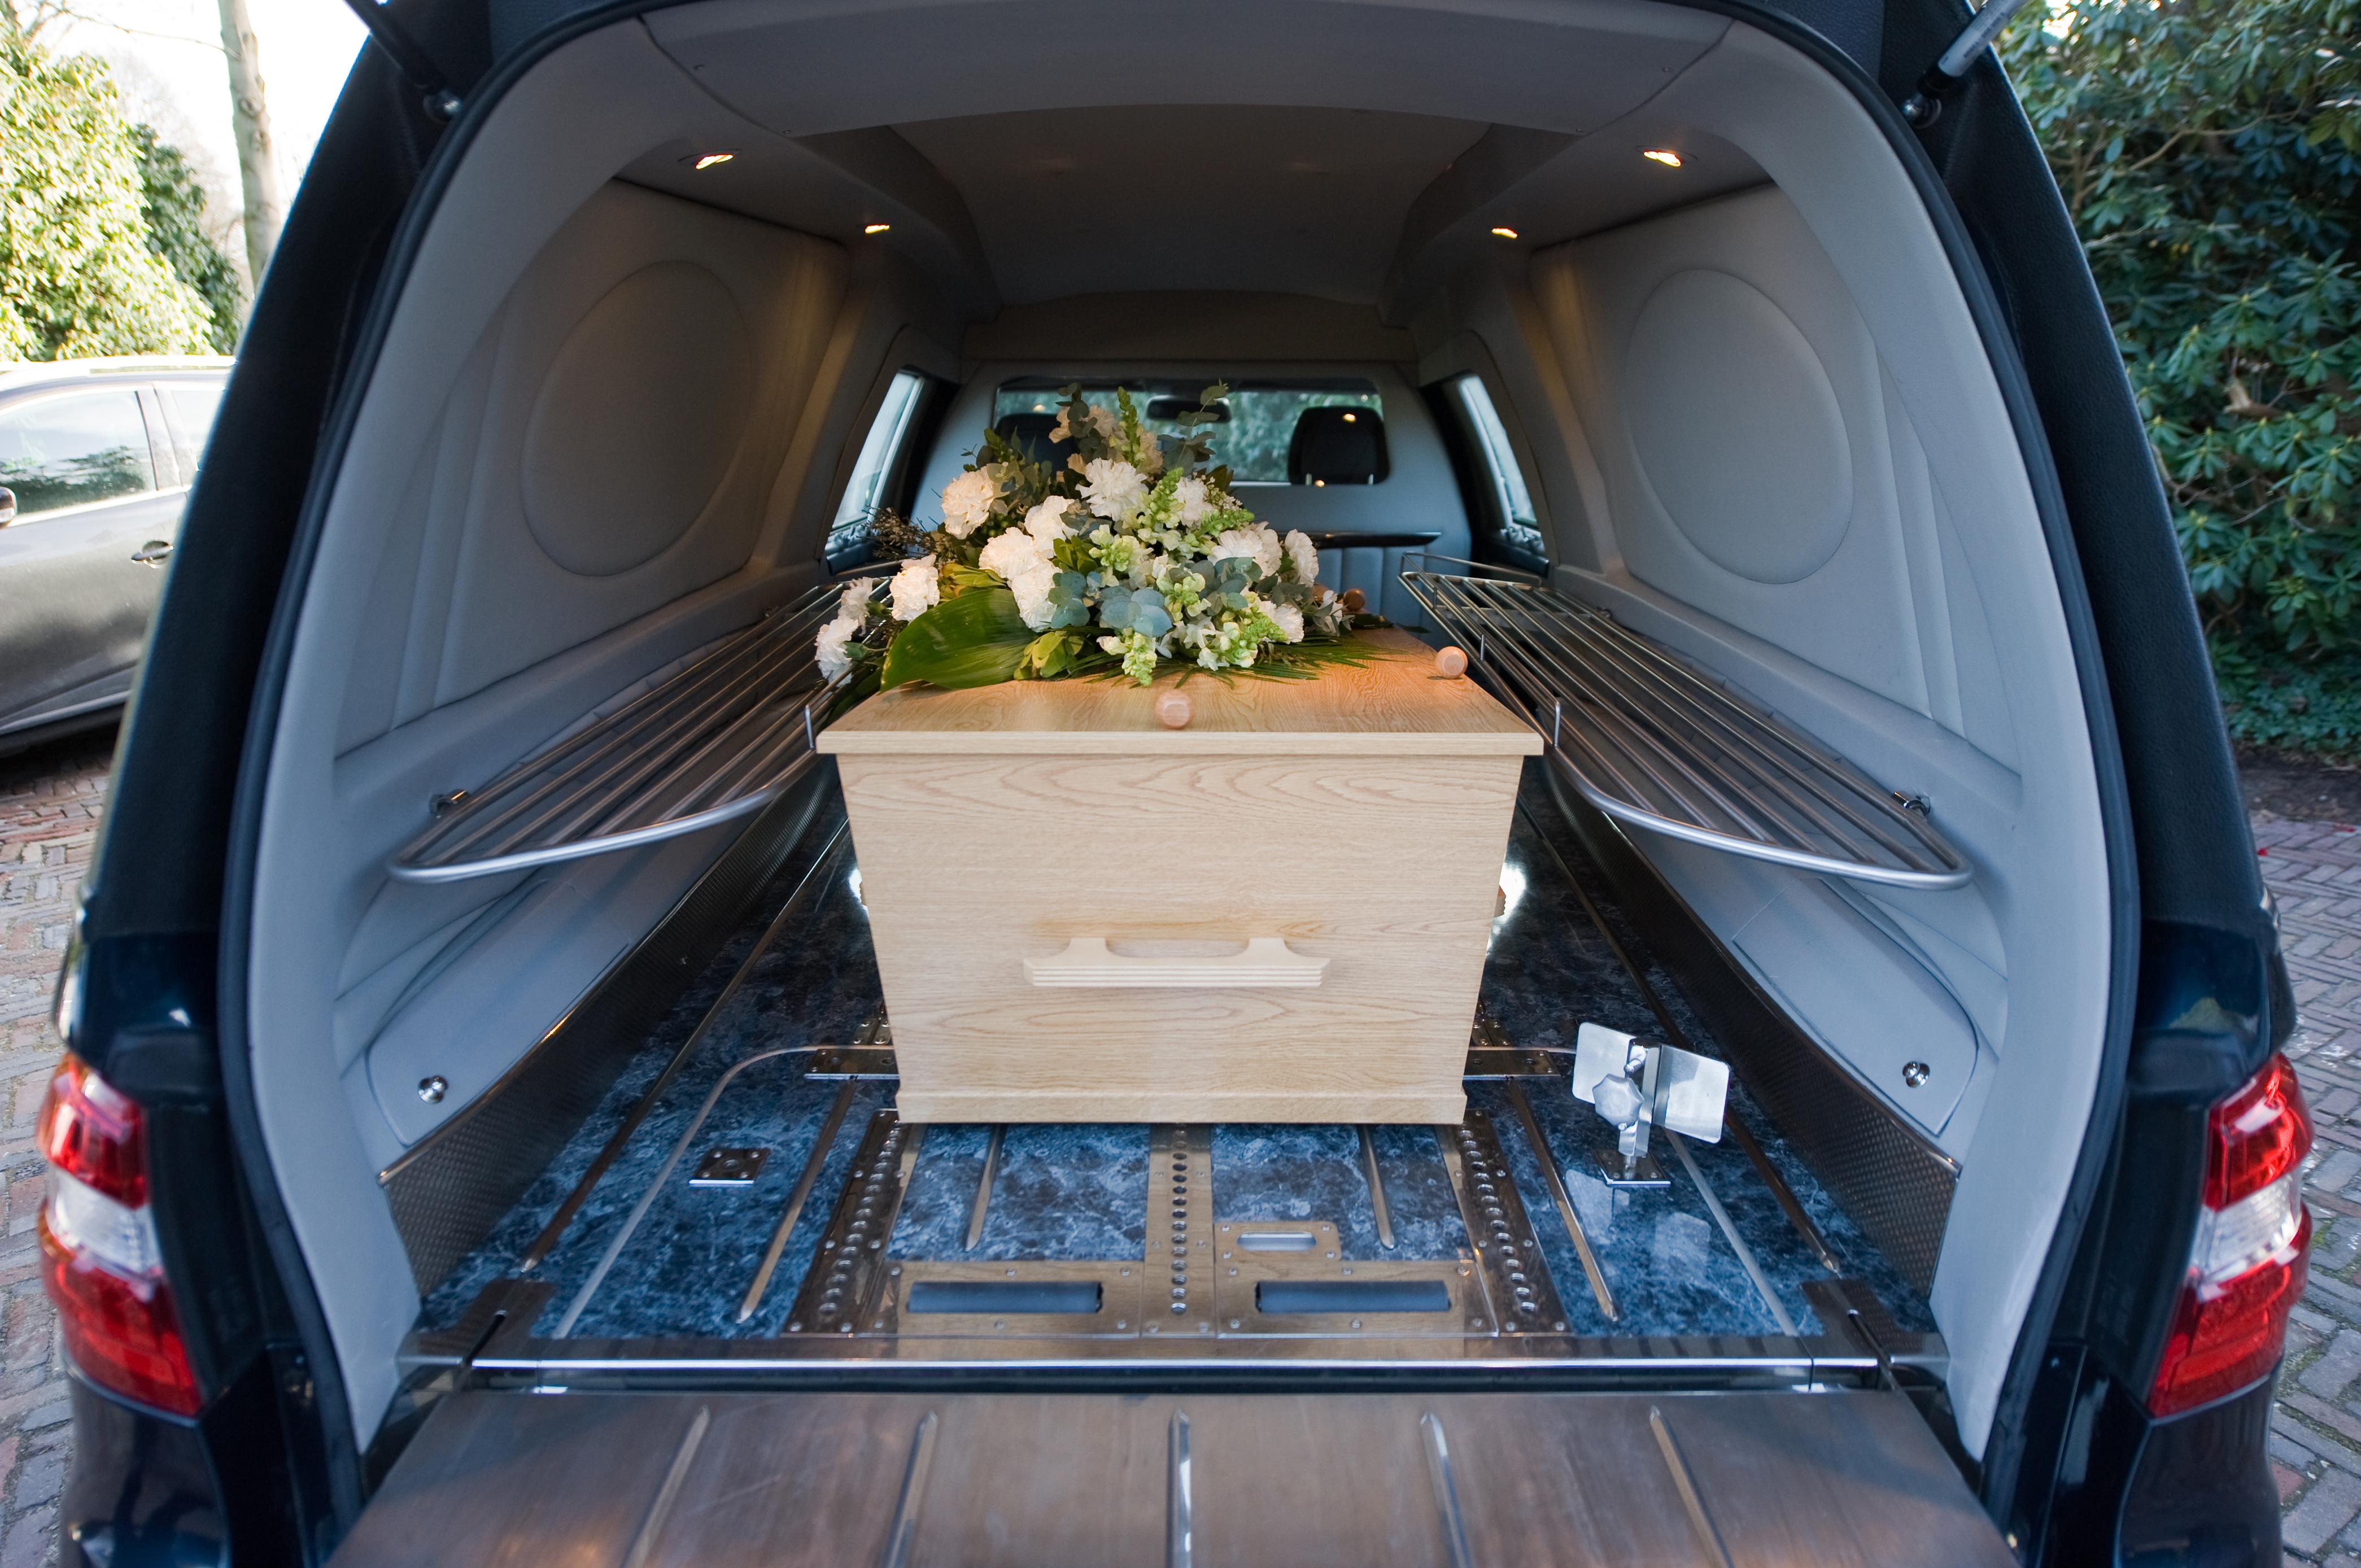 The granddad had a lovely funeral and was buried next to his wife. | Source: Shutterstock